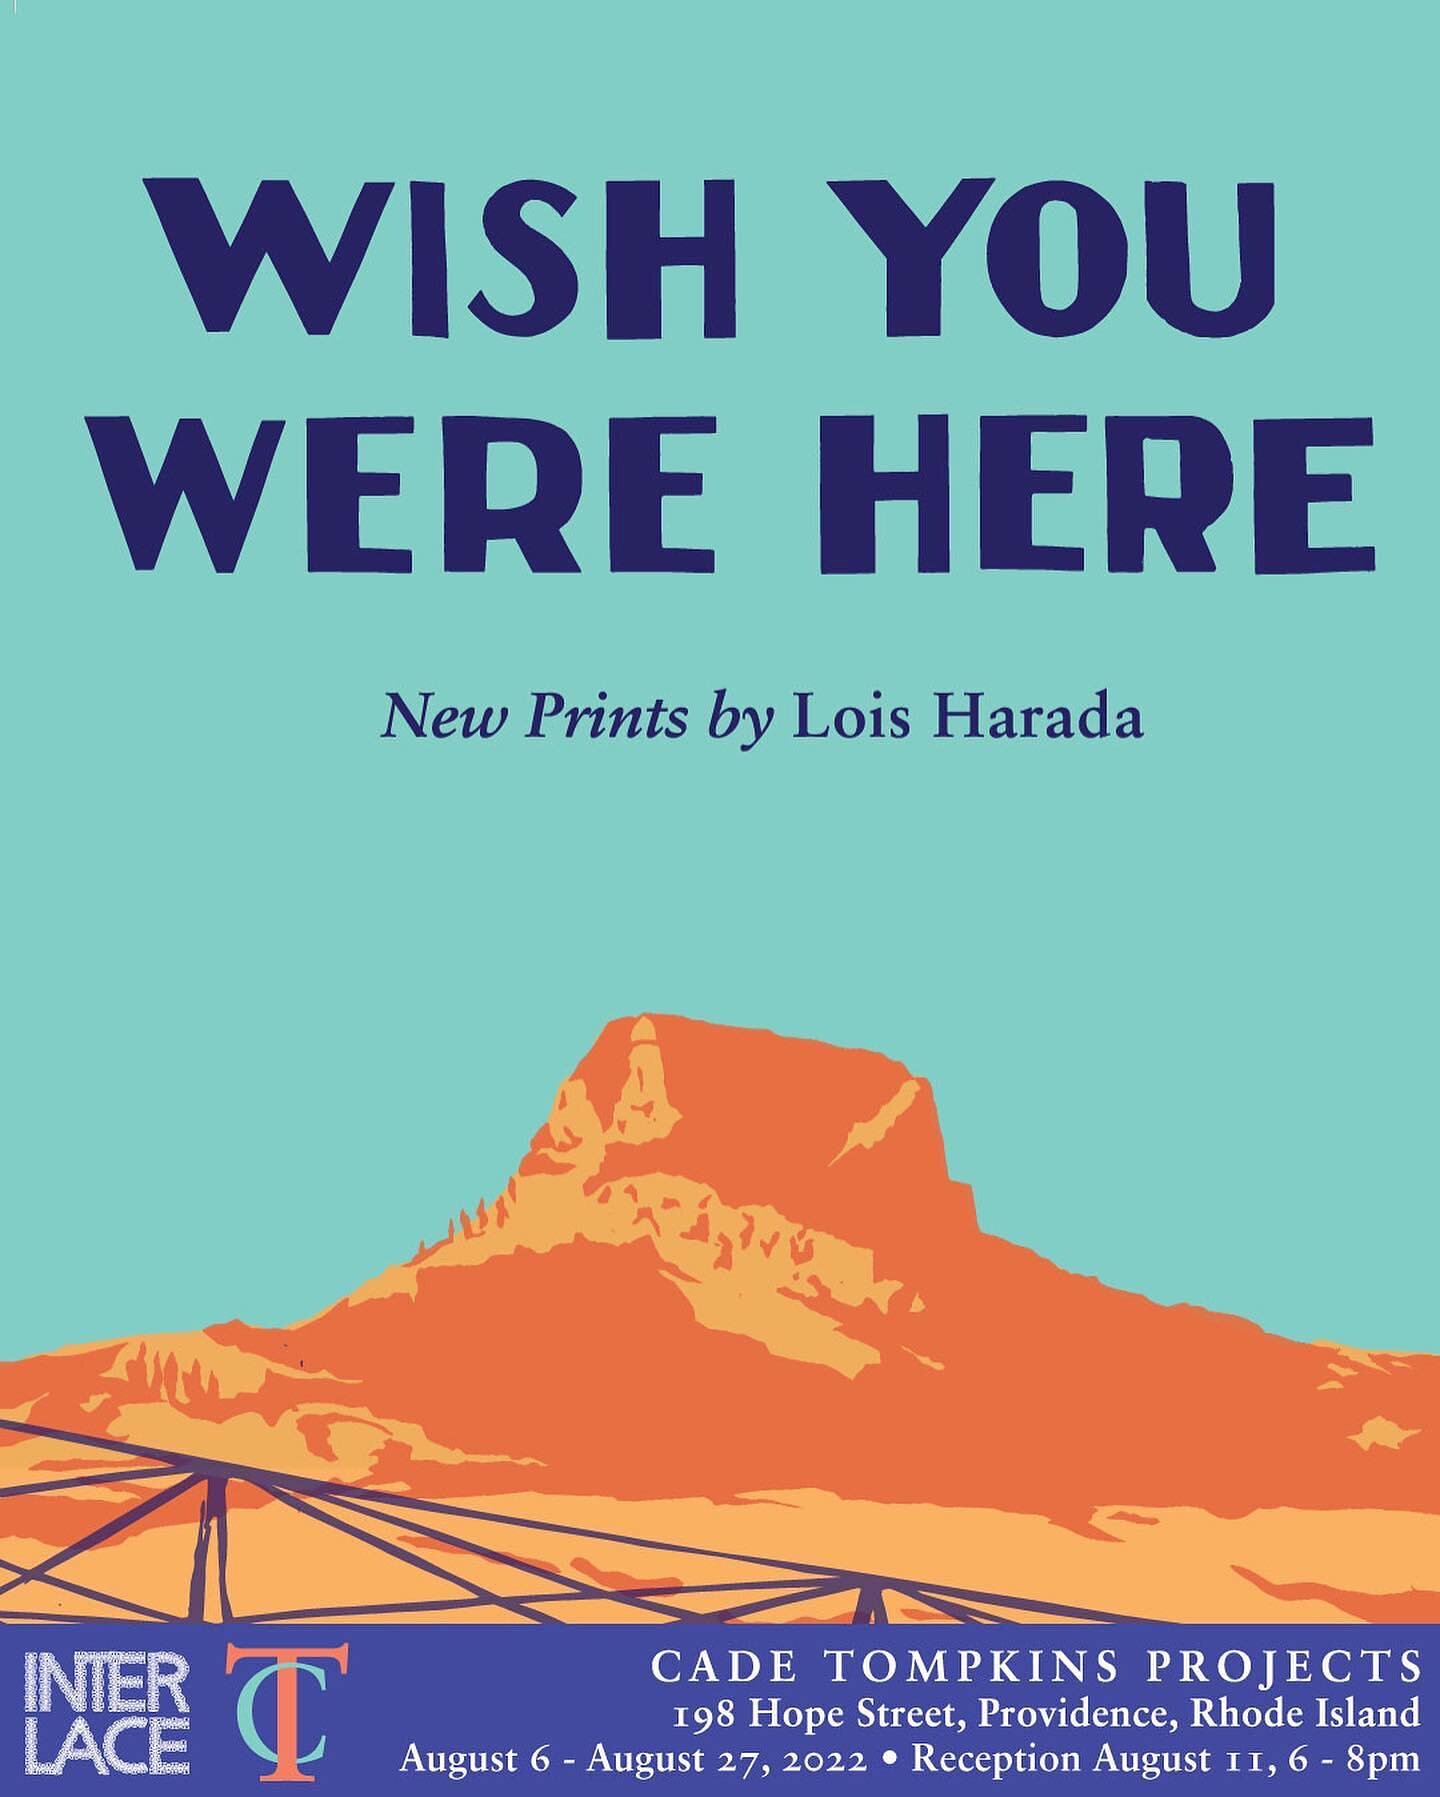 WISH YOU WERE HERE, a new series of silkscreen posters on view August 11 to 28, 2022. These prints are inspired by WPA style posters from the 1940s &mdash; instead of highlighting travel destinations or National Parks, my works are based on Japanese 